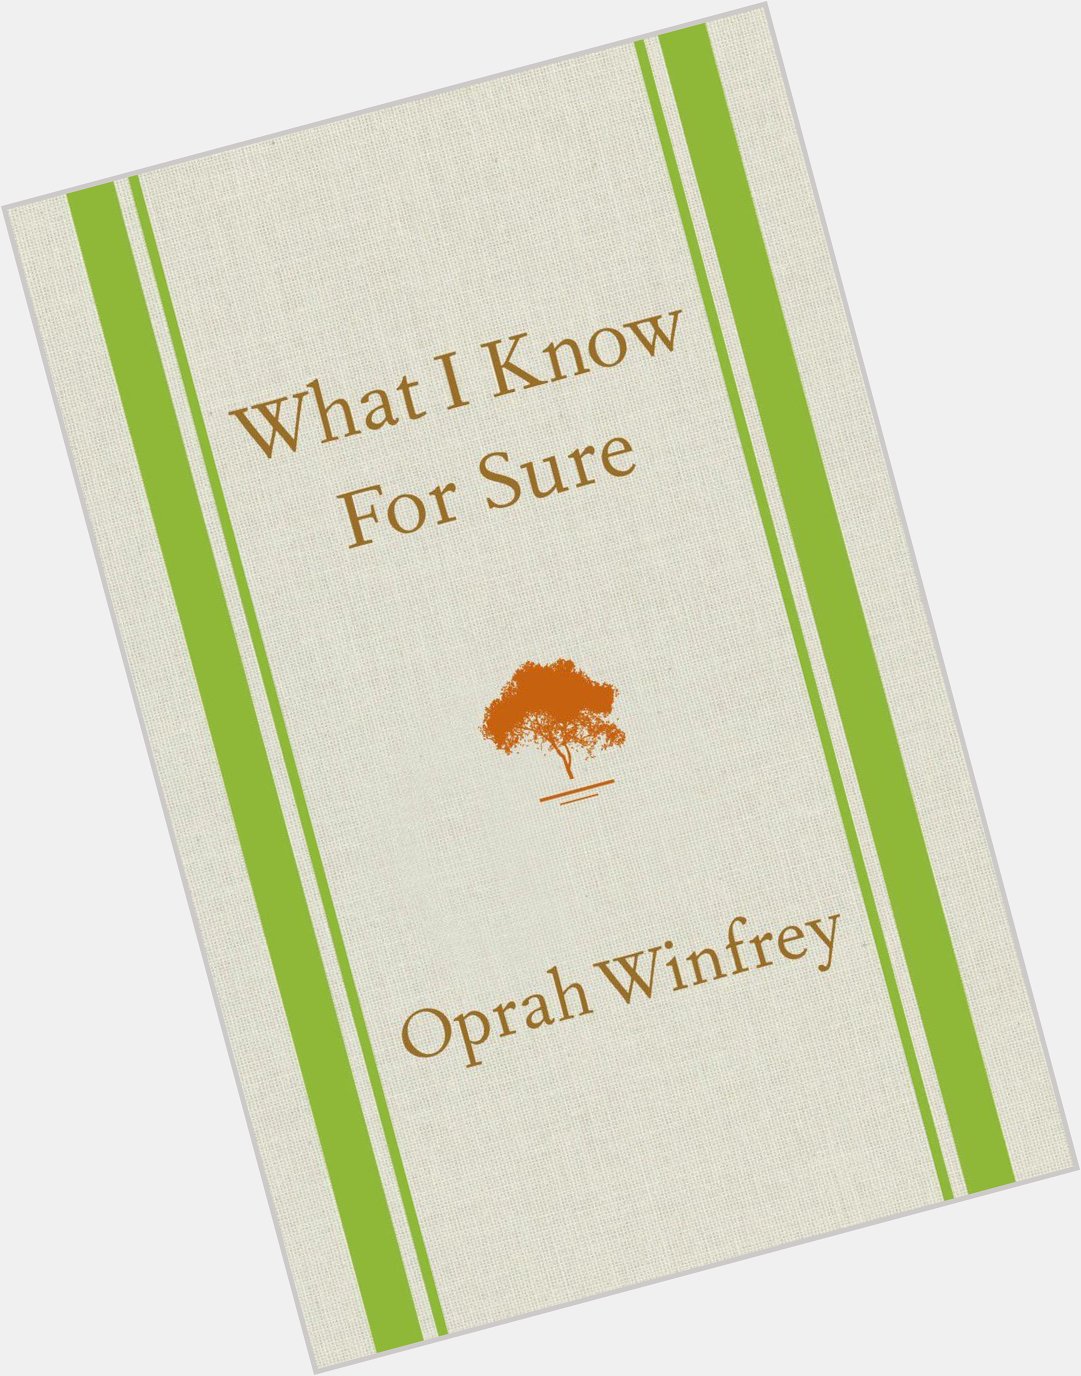 Happy 60th Birthday, Read: \"What I Know For Sure\" by Oprah Winfrey  